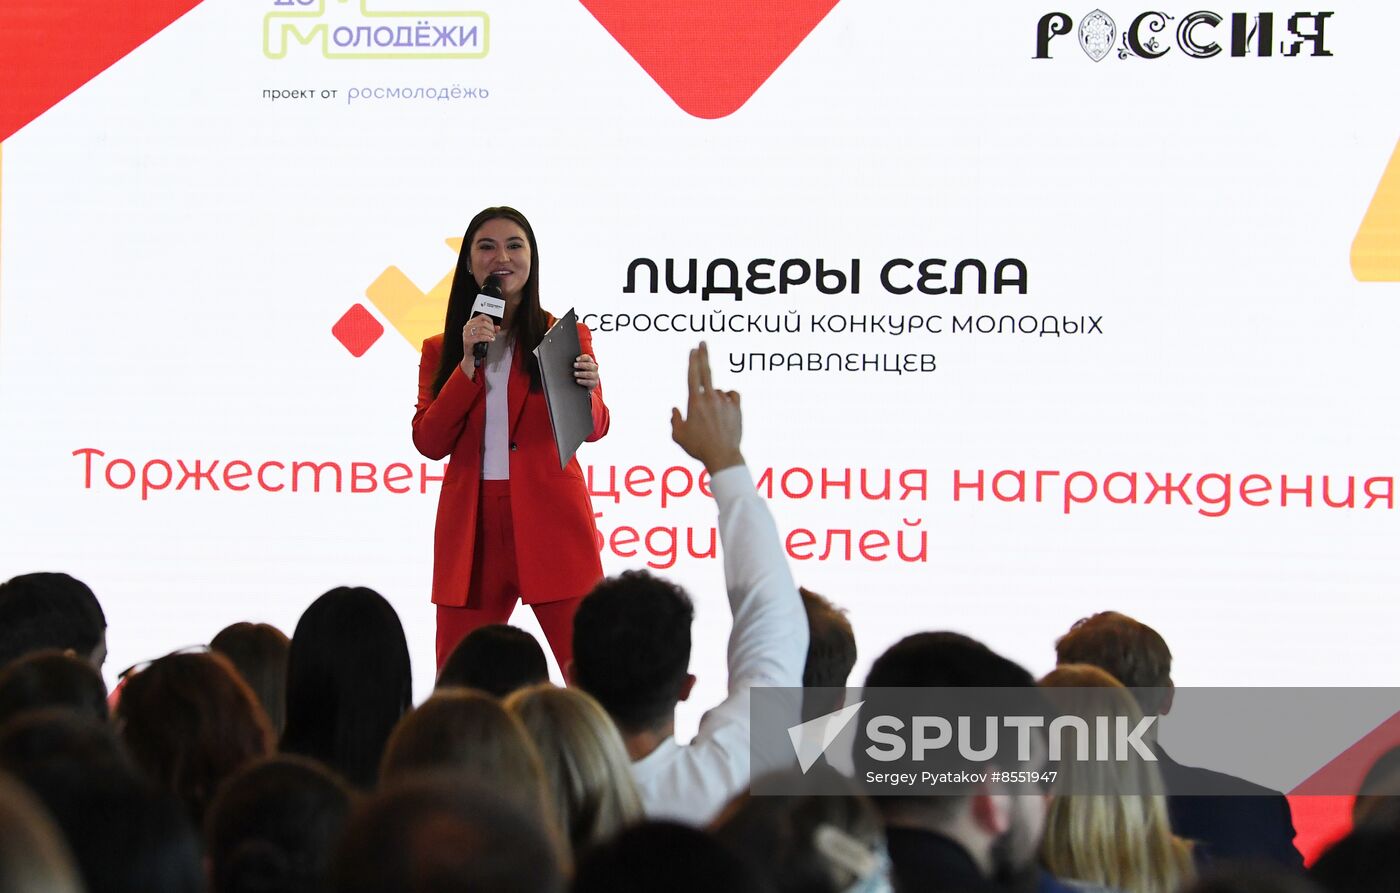 International RUSSIA EXPO Forum and Exhibition. Village Leaders contest for young managers